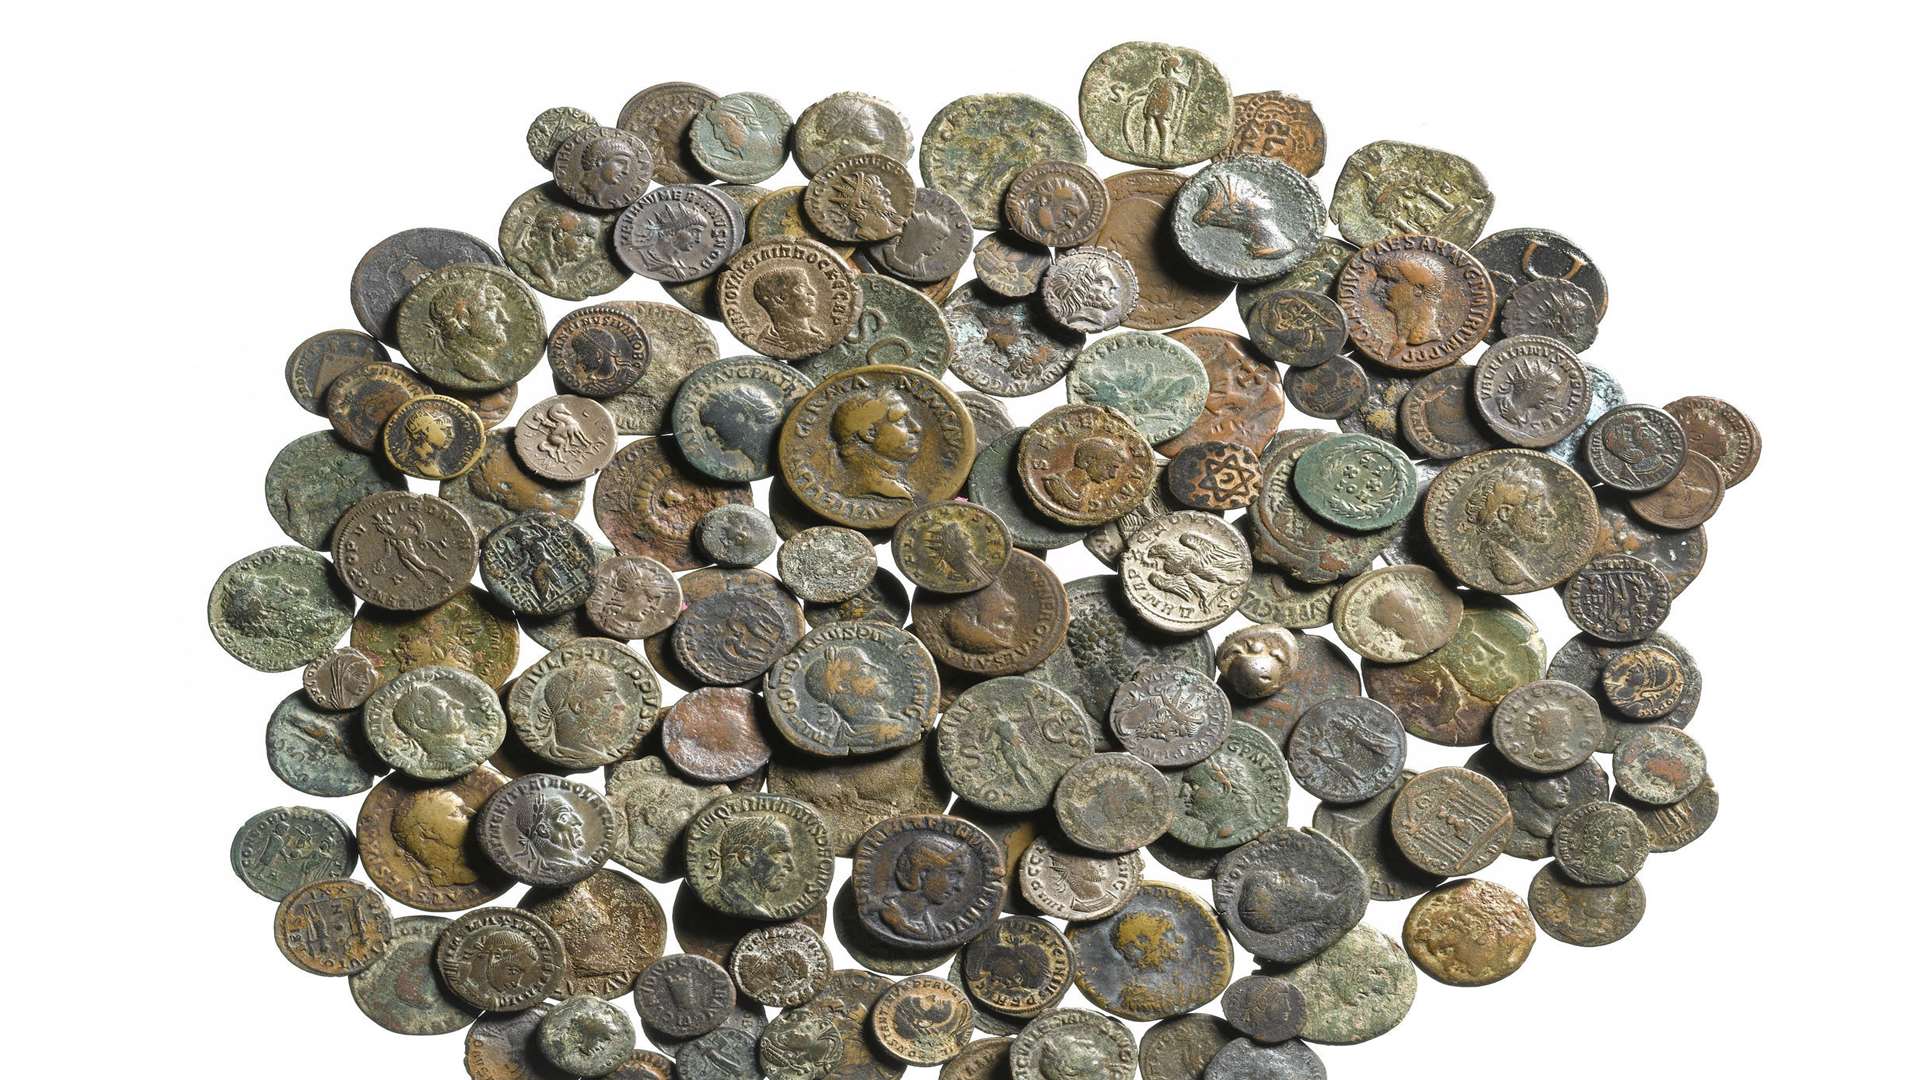 Rare ancient coins found in drawer at Scotney Castle near Lamberhurst